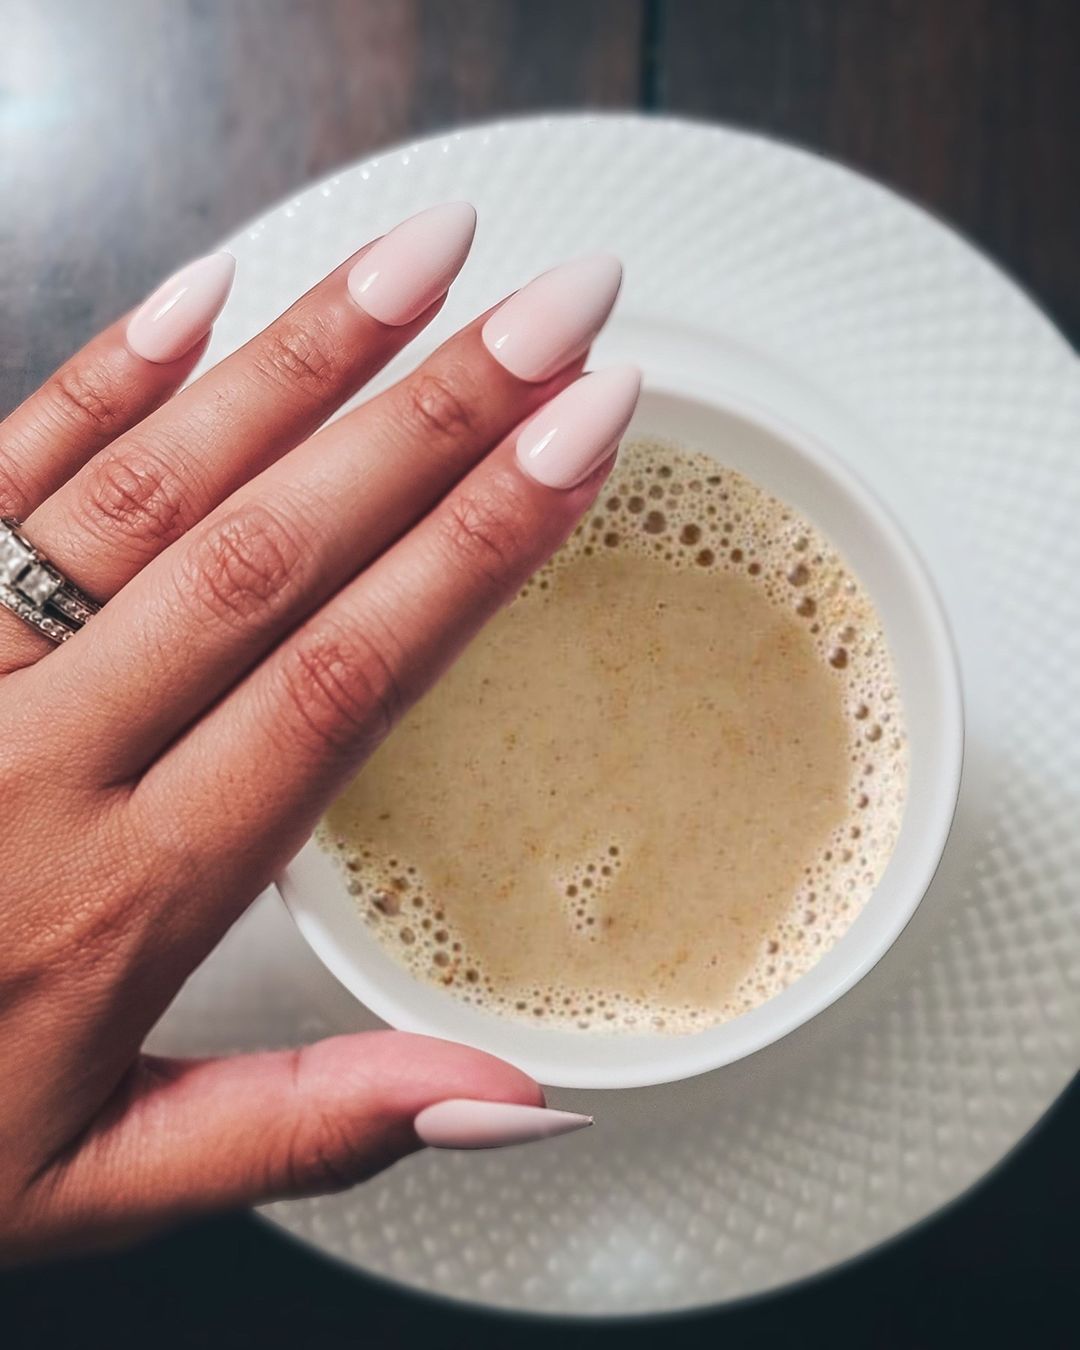 Long length, stiletto shape, glossy finish nude press-on gel  WITH A COFFEE